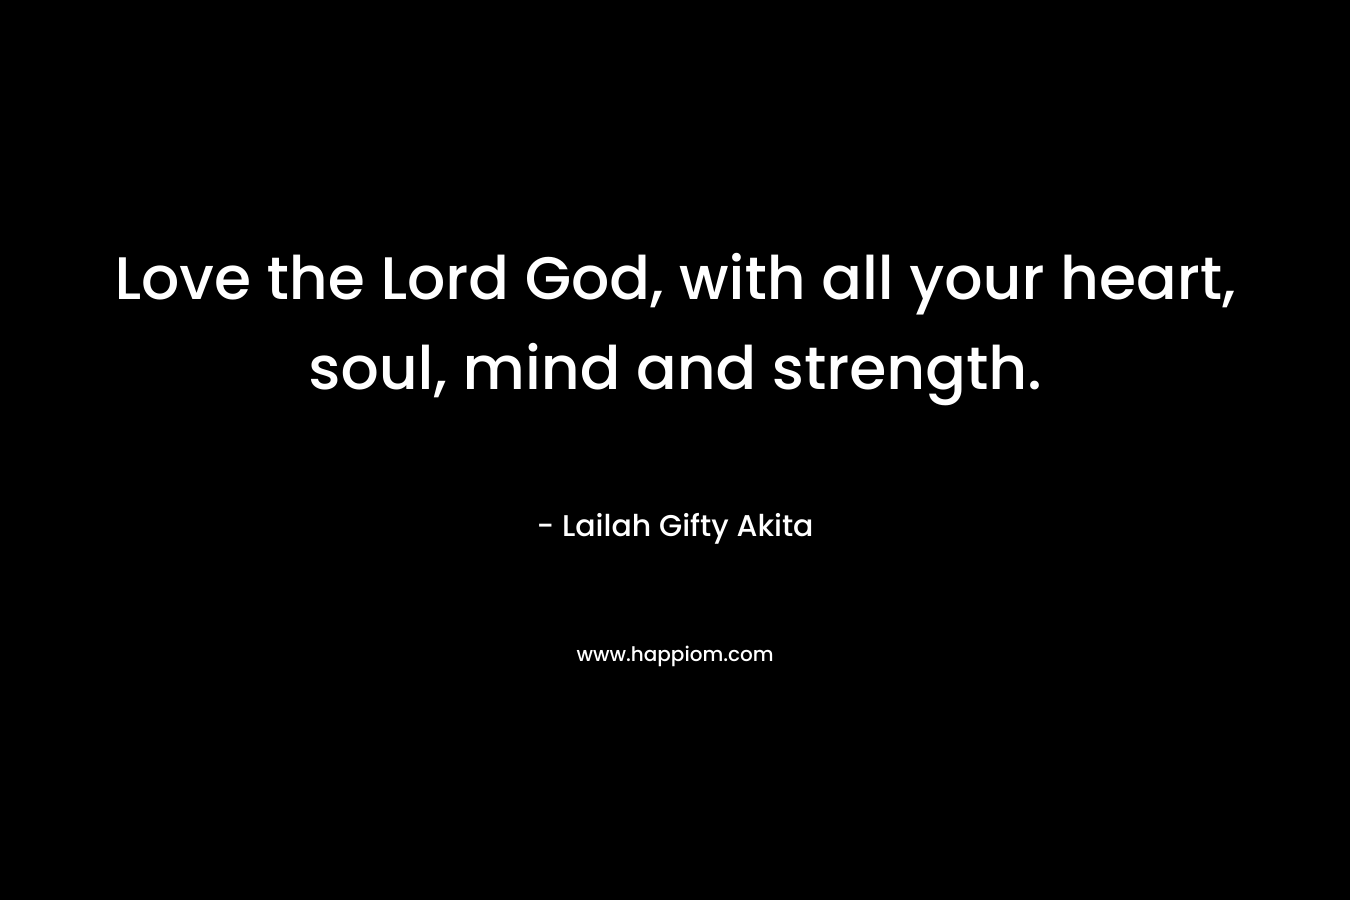 Love the Lord God, with all your heart, soul, mind and strength.